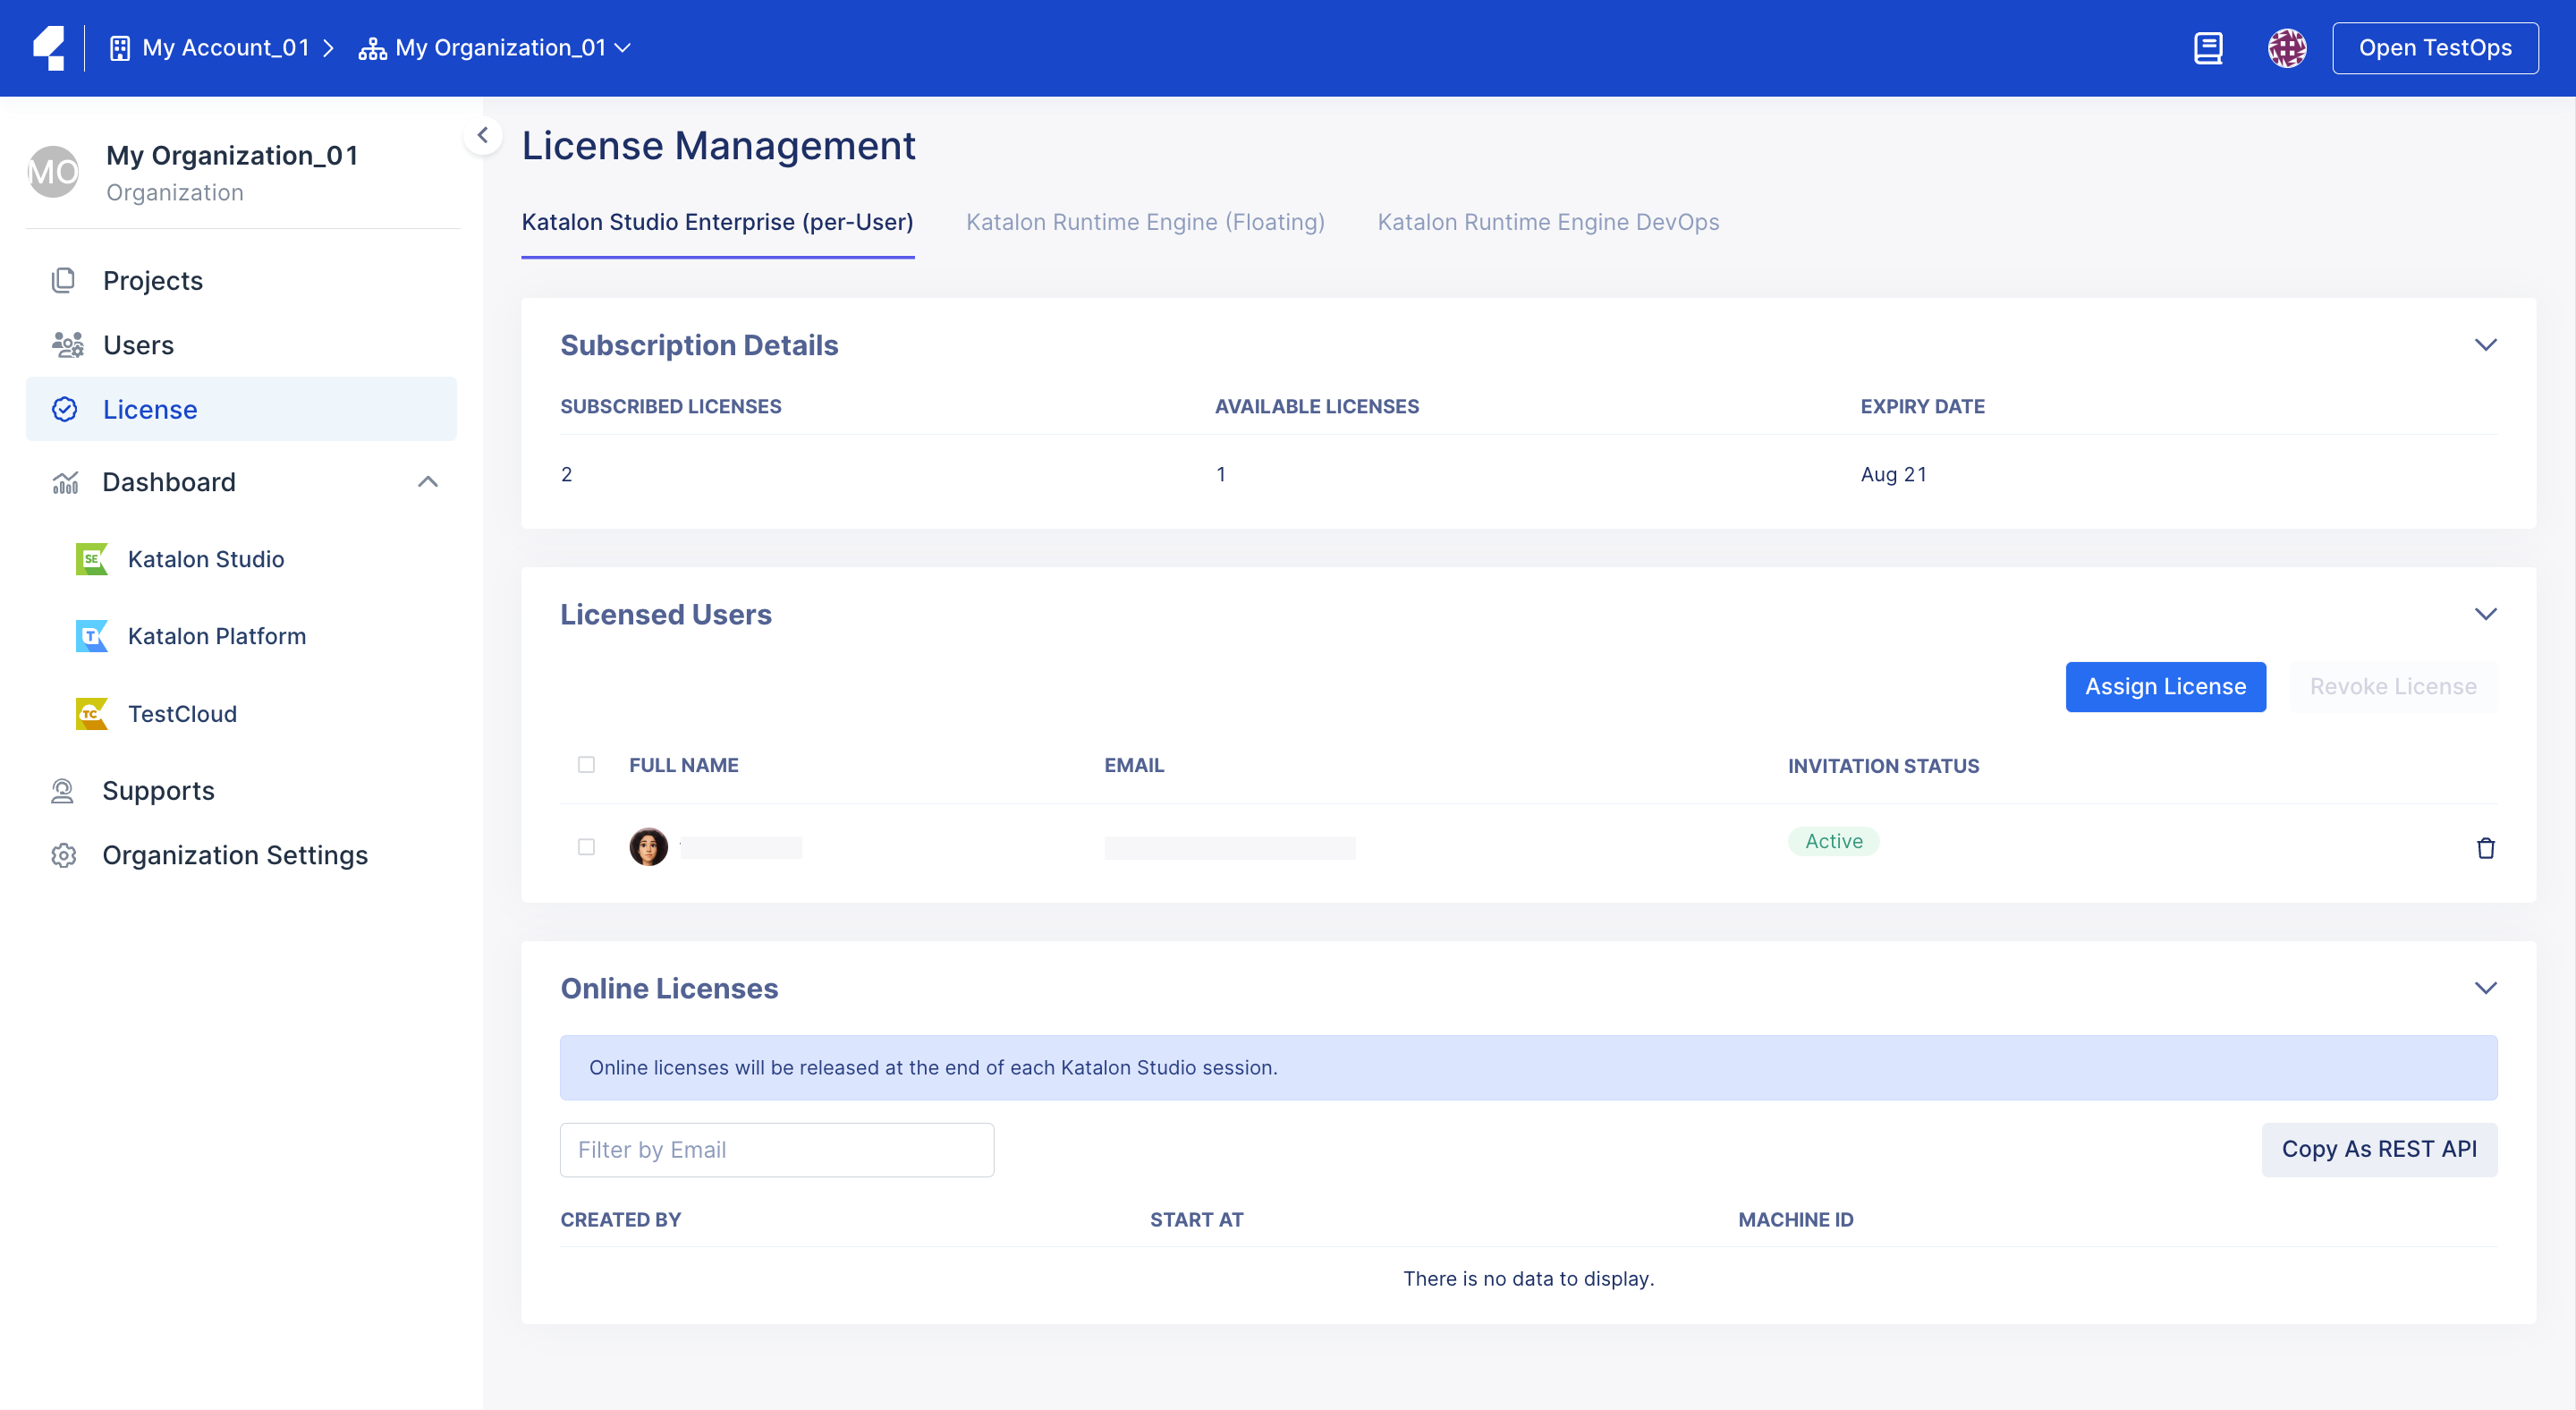 License Management page